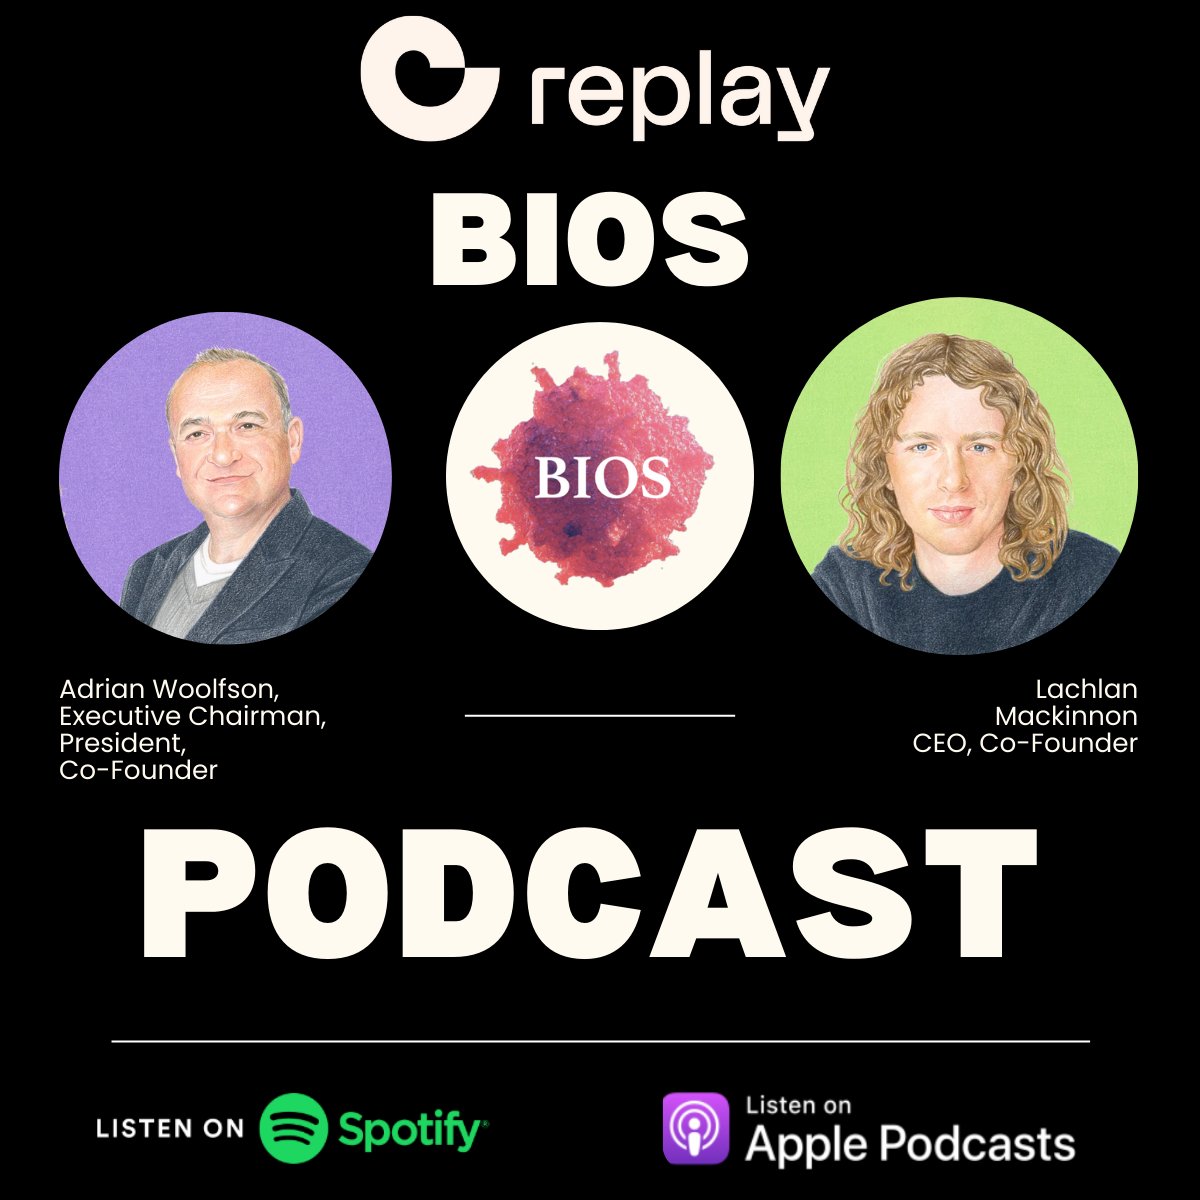 Thank you to @bios_community for inviting @replaybio to participate in your podcast. We enjoyed the discussion around Replay’s origins and the Company’s potential future as a leader in genomic medicine.
youtube.com/watch?v=To6u4L… 
#genomicMedicine #genomeWriting #Oncology #Biotech